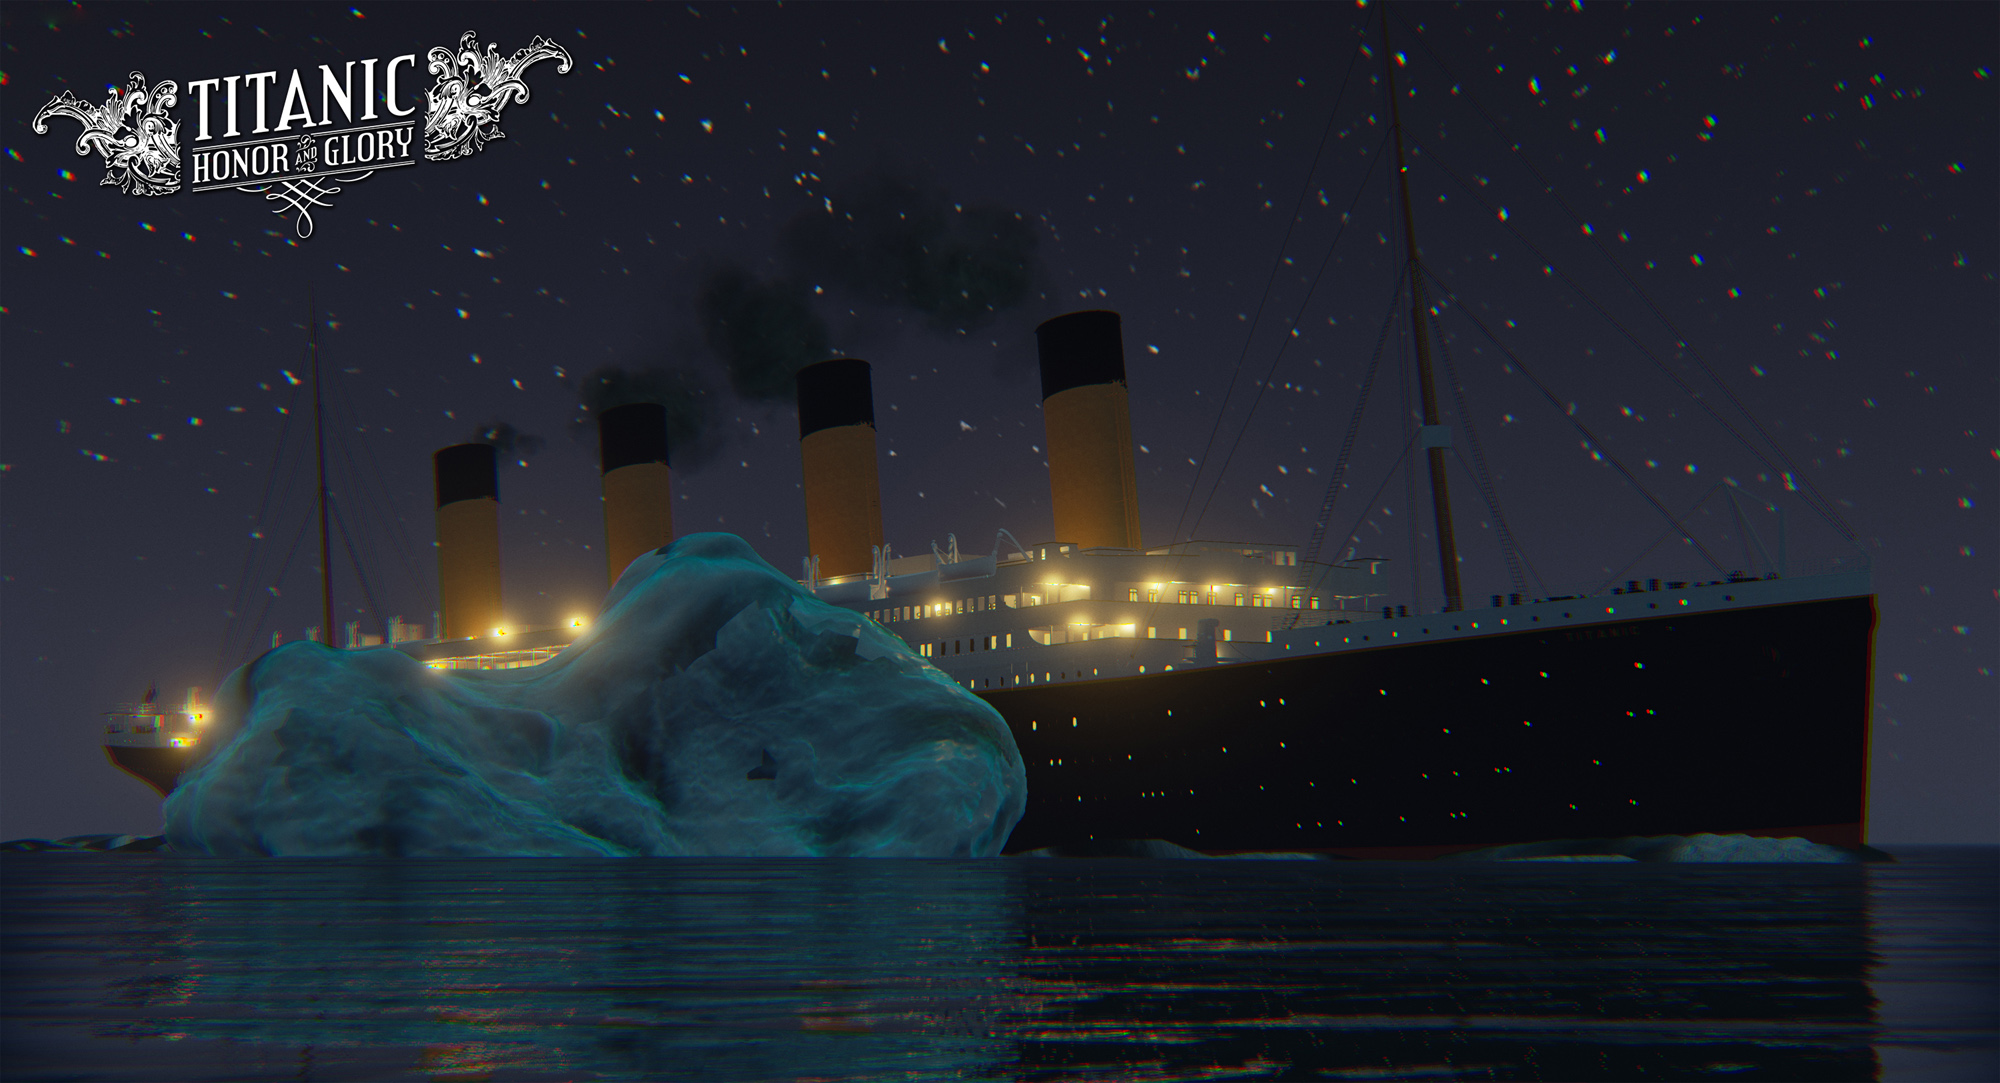 You Can Watch The Titanic Sink in Real Time if You Have About 3 Hours to Spare